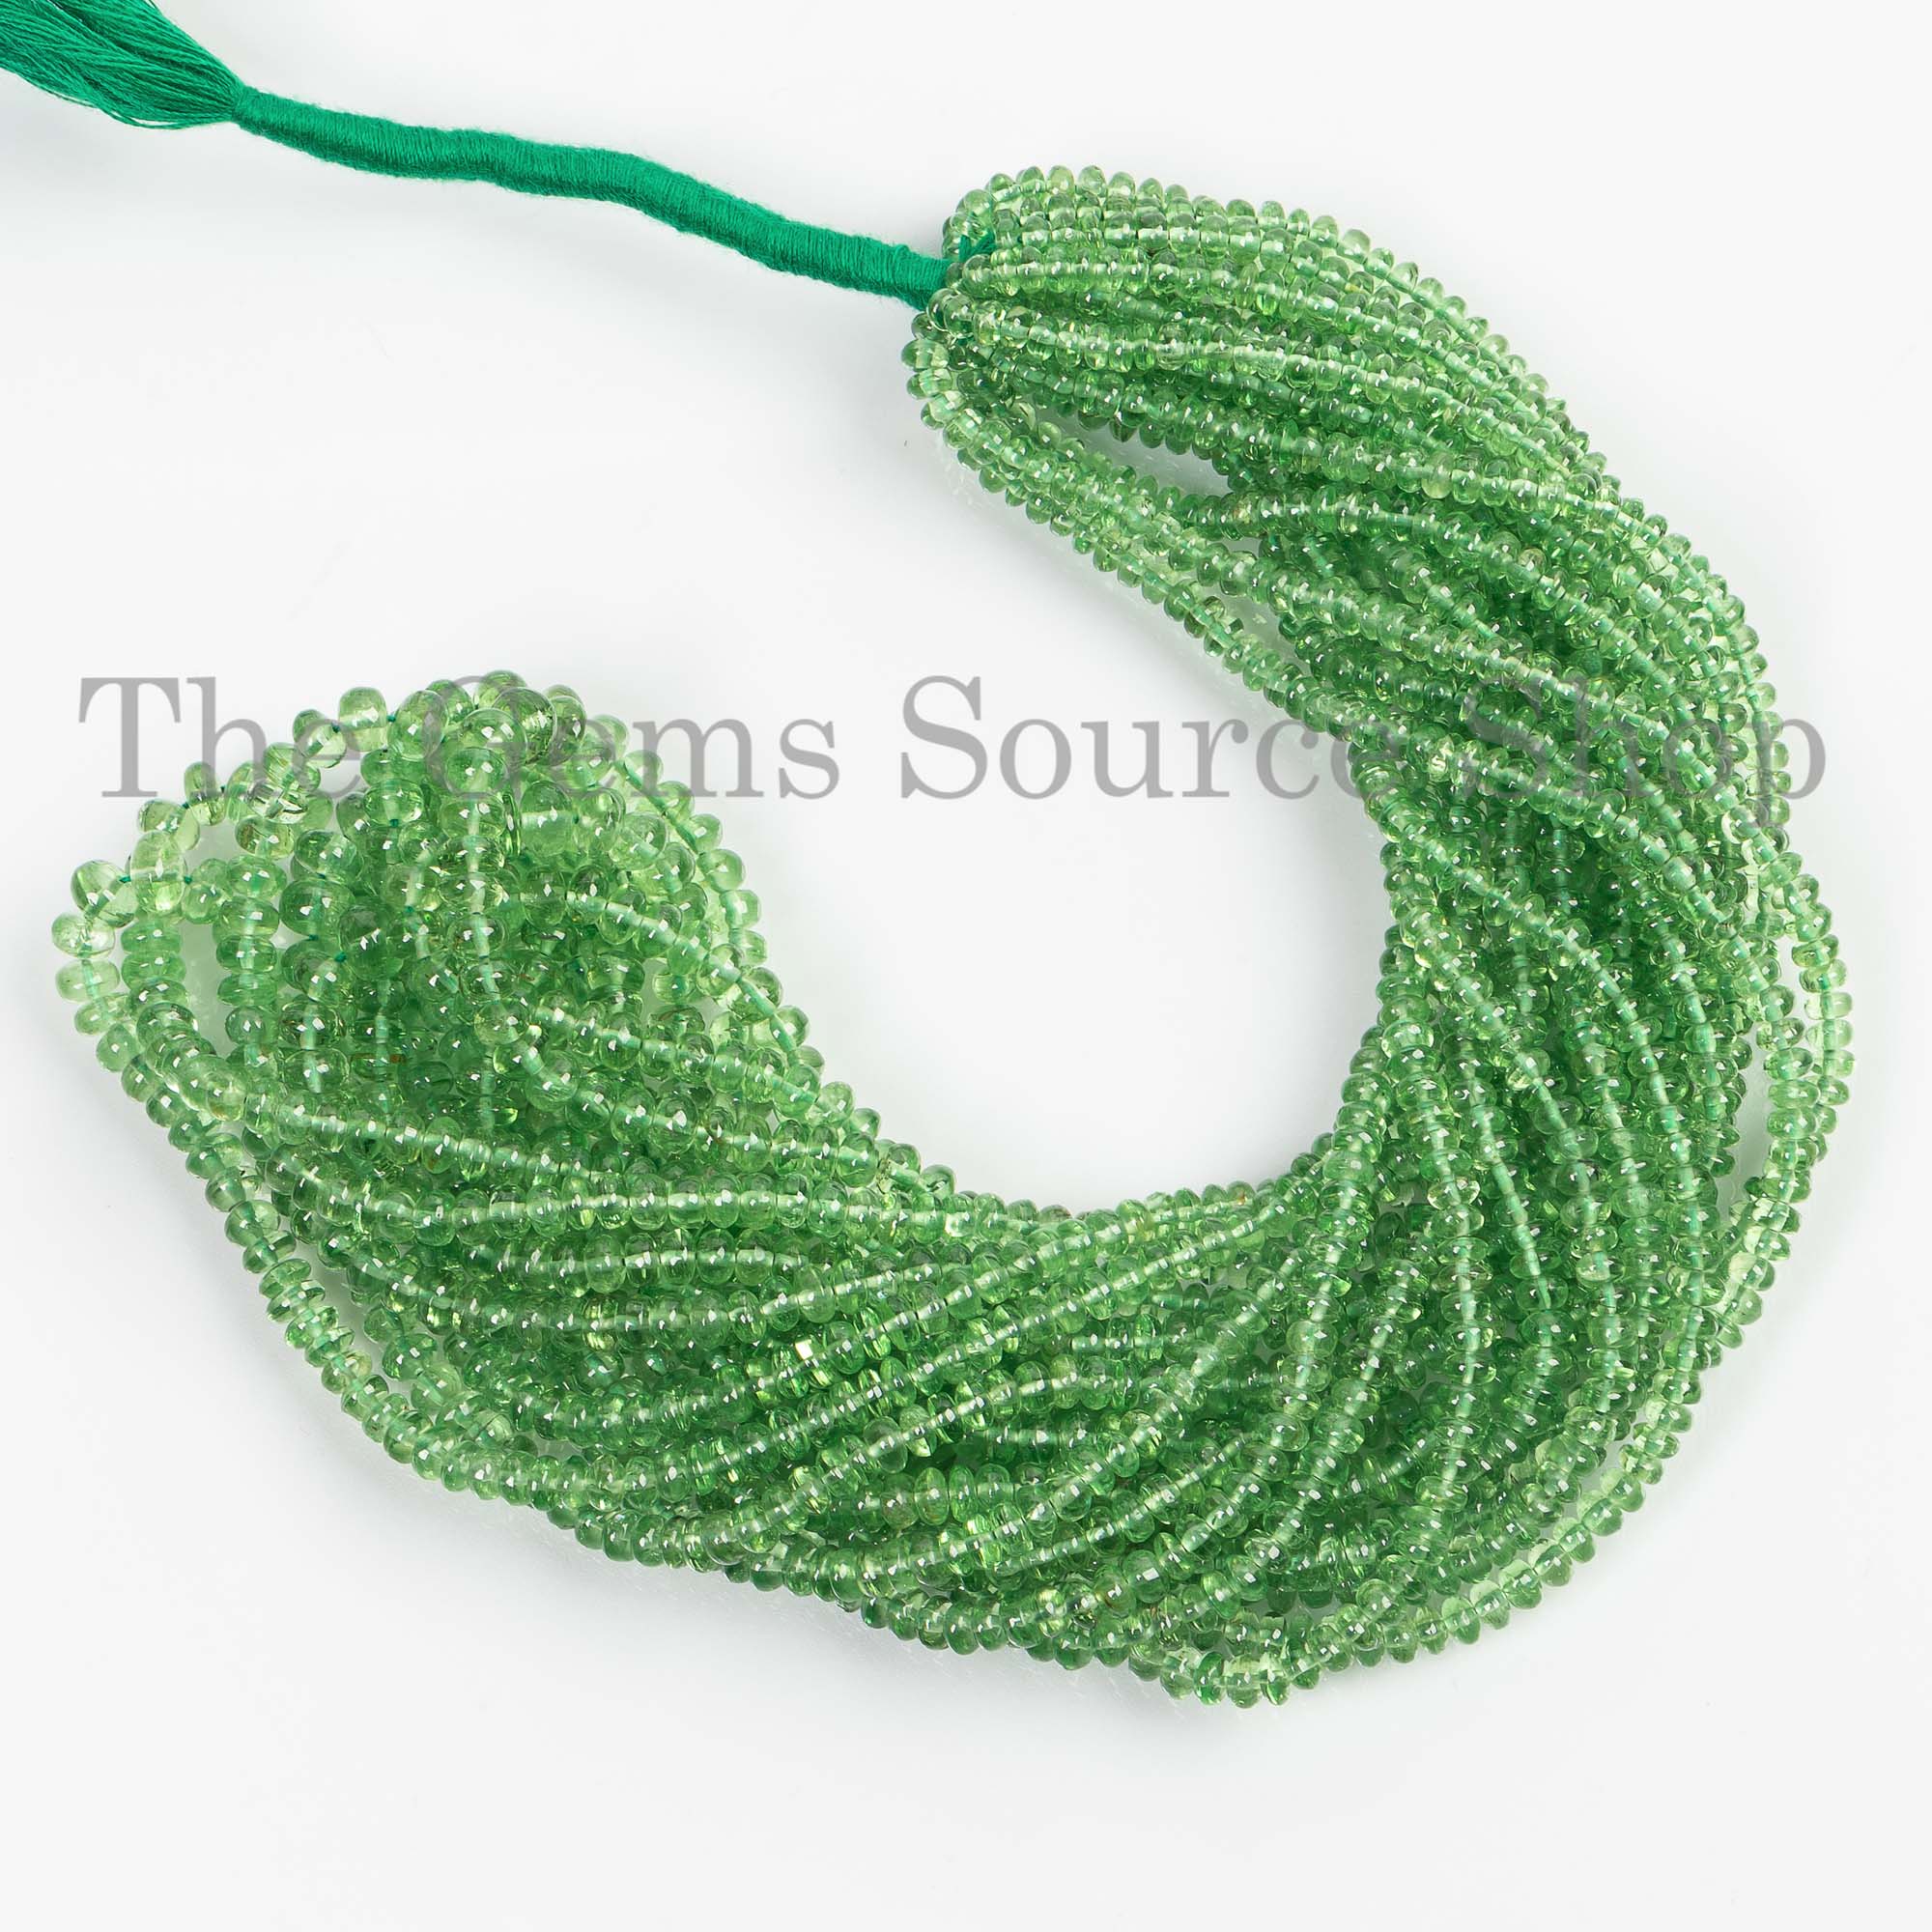 High Quality Tsavorite Rondelle Beads, 3-5mm Tsavorite Beads, Tsavorite Plain Rondelle Beads, Tsavorite Smooth Beads, Beads For Jewelry